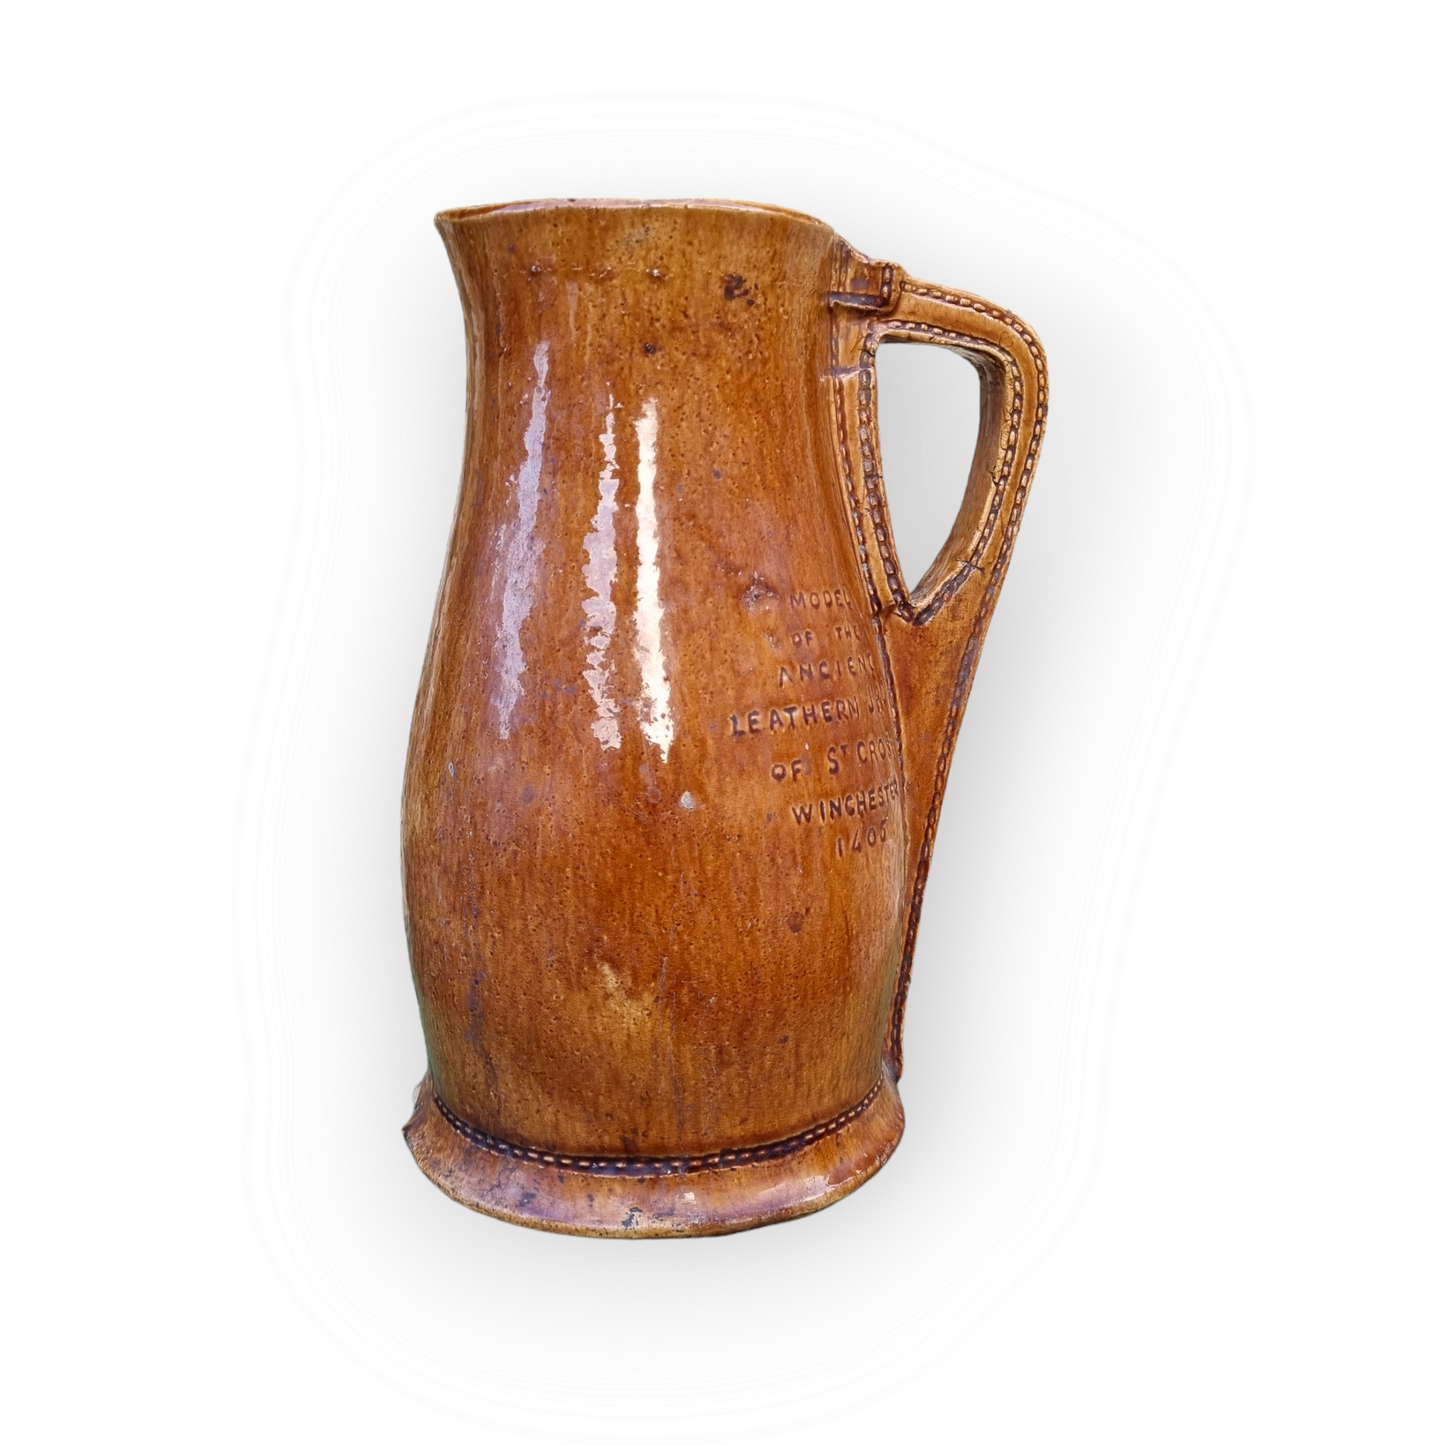 Large 19th Century English Antique Stoneware Jug / Pitcher in the Form of a Leather Bombard Impressed With The Stamp "MODEL OF THE ANCIENT LEATHER JACK OF ST CROSS WINCHESTER 1405".